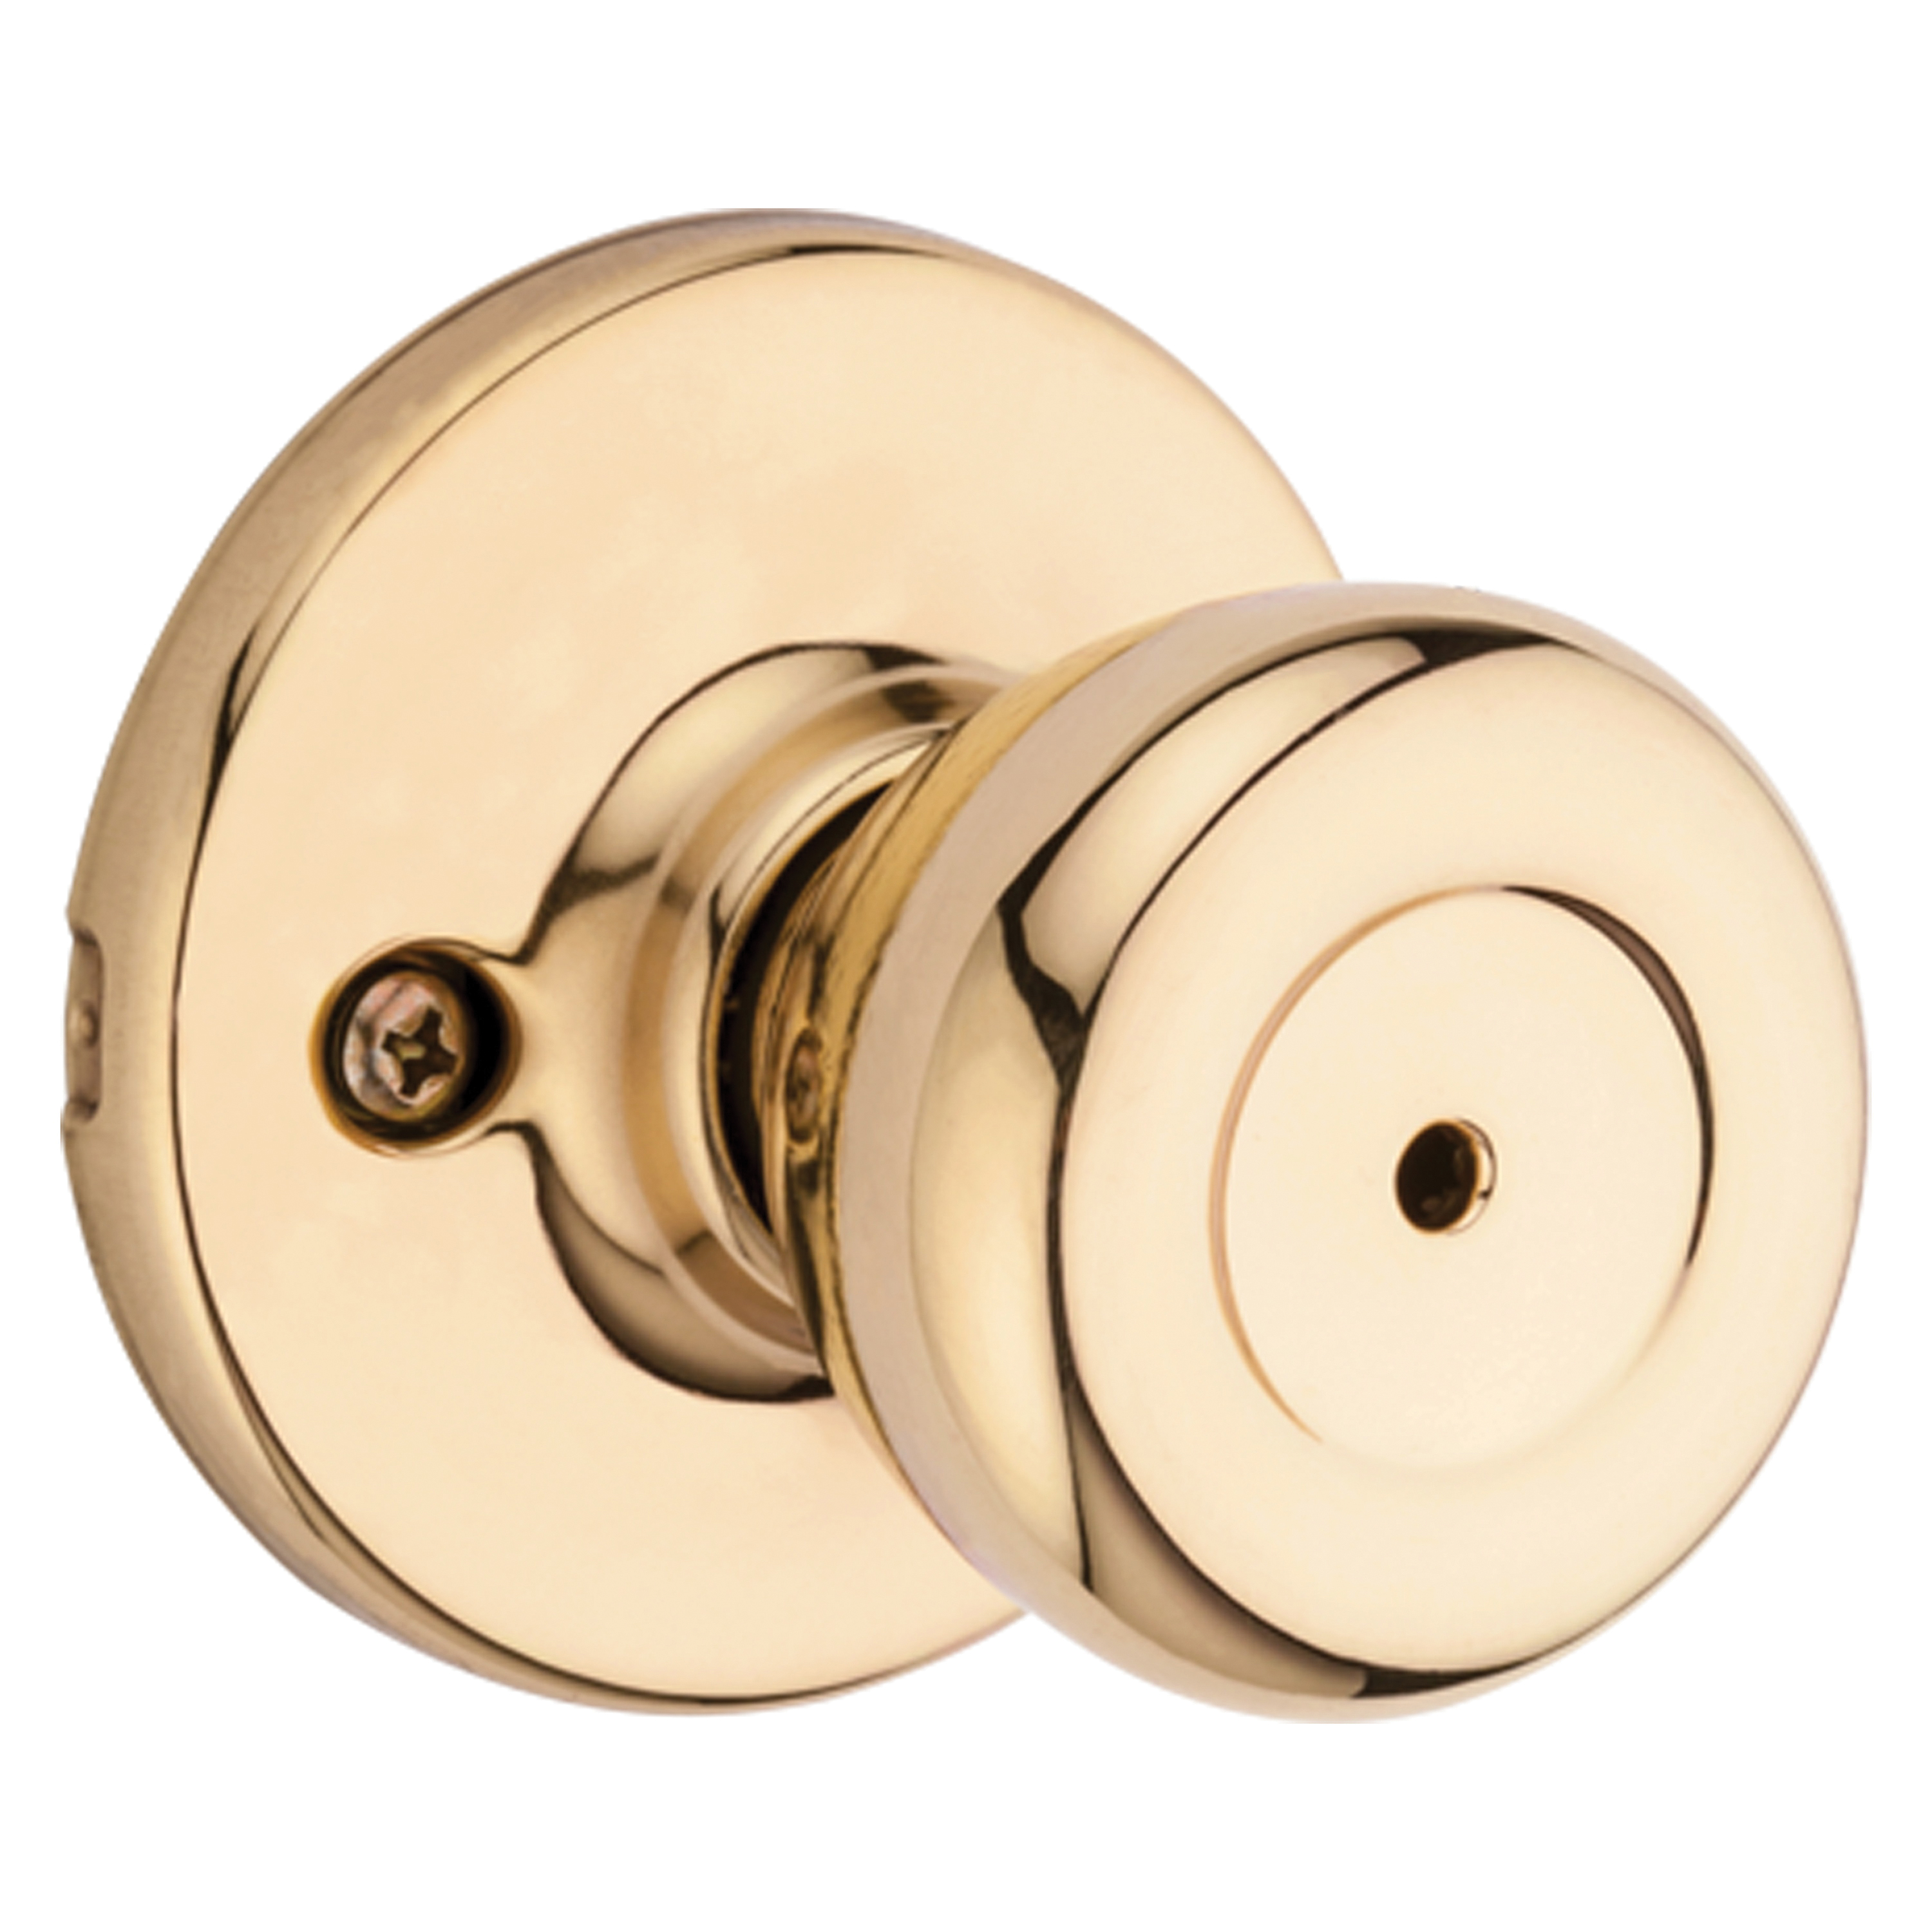 Kwikset 300T 3RCLRCSBX Privacy Lockset, Polished Brass, For: Bedroom and Bathroom Doors